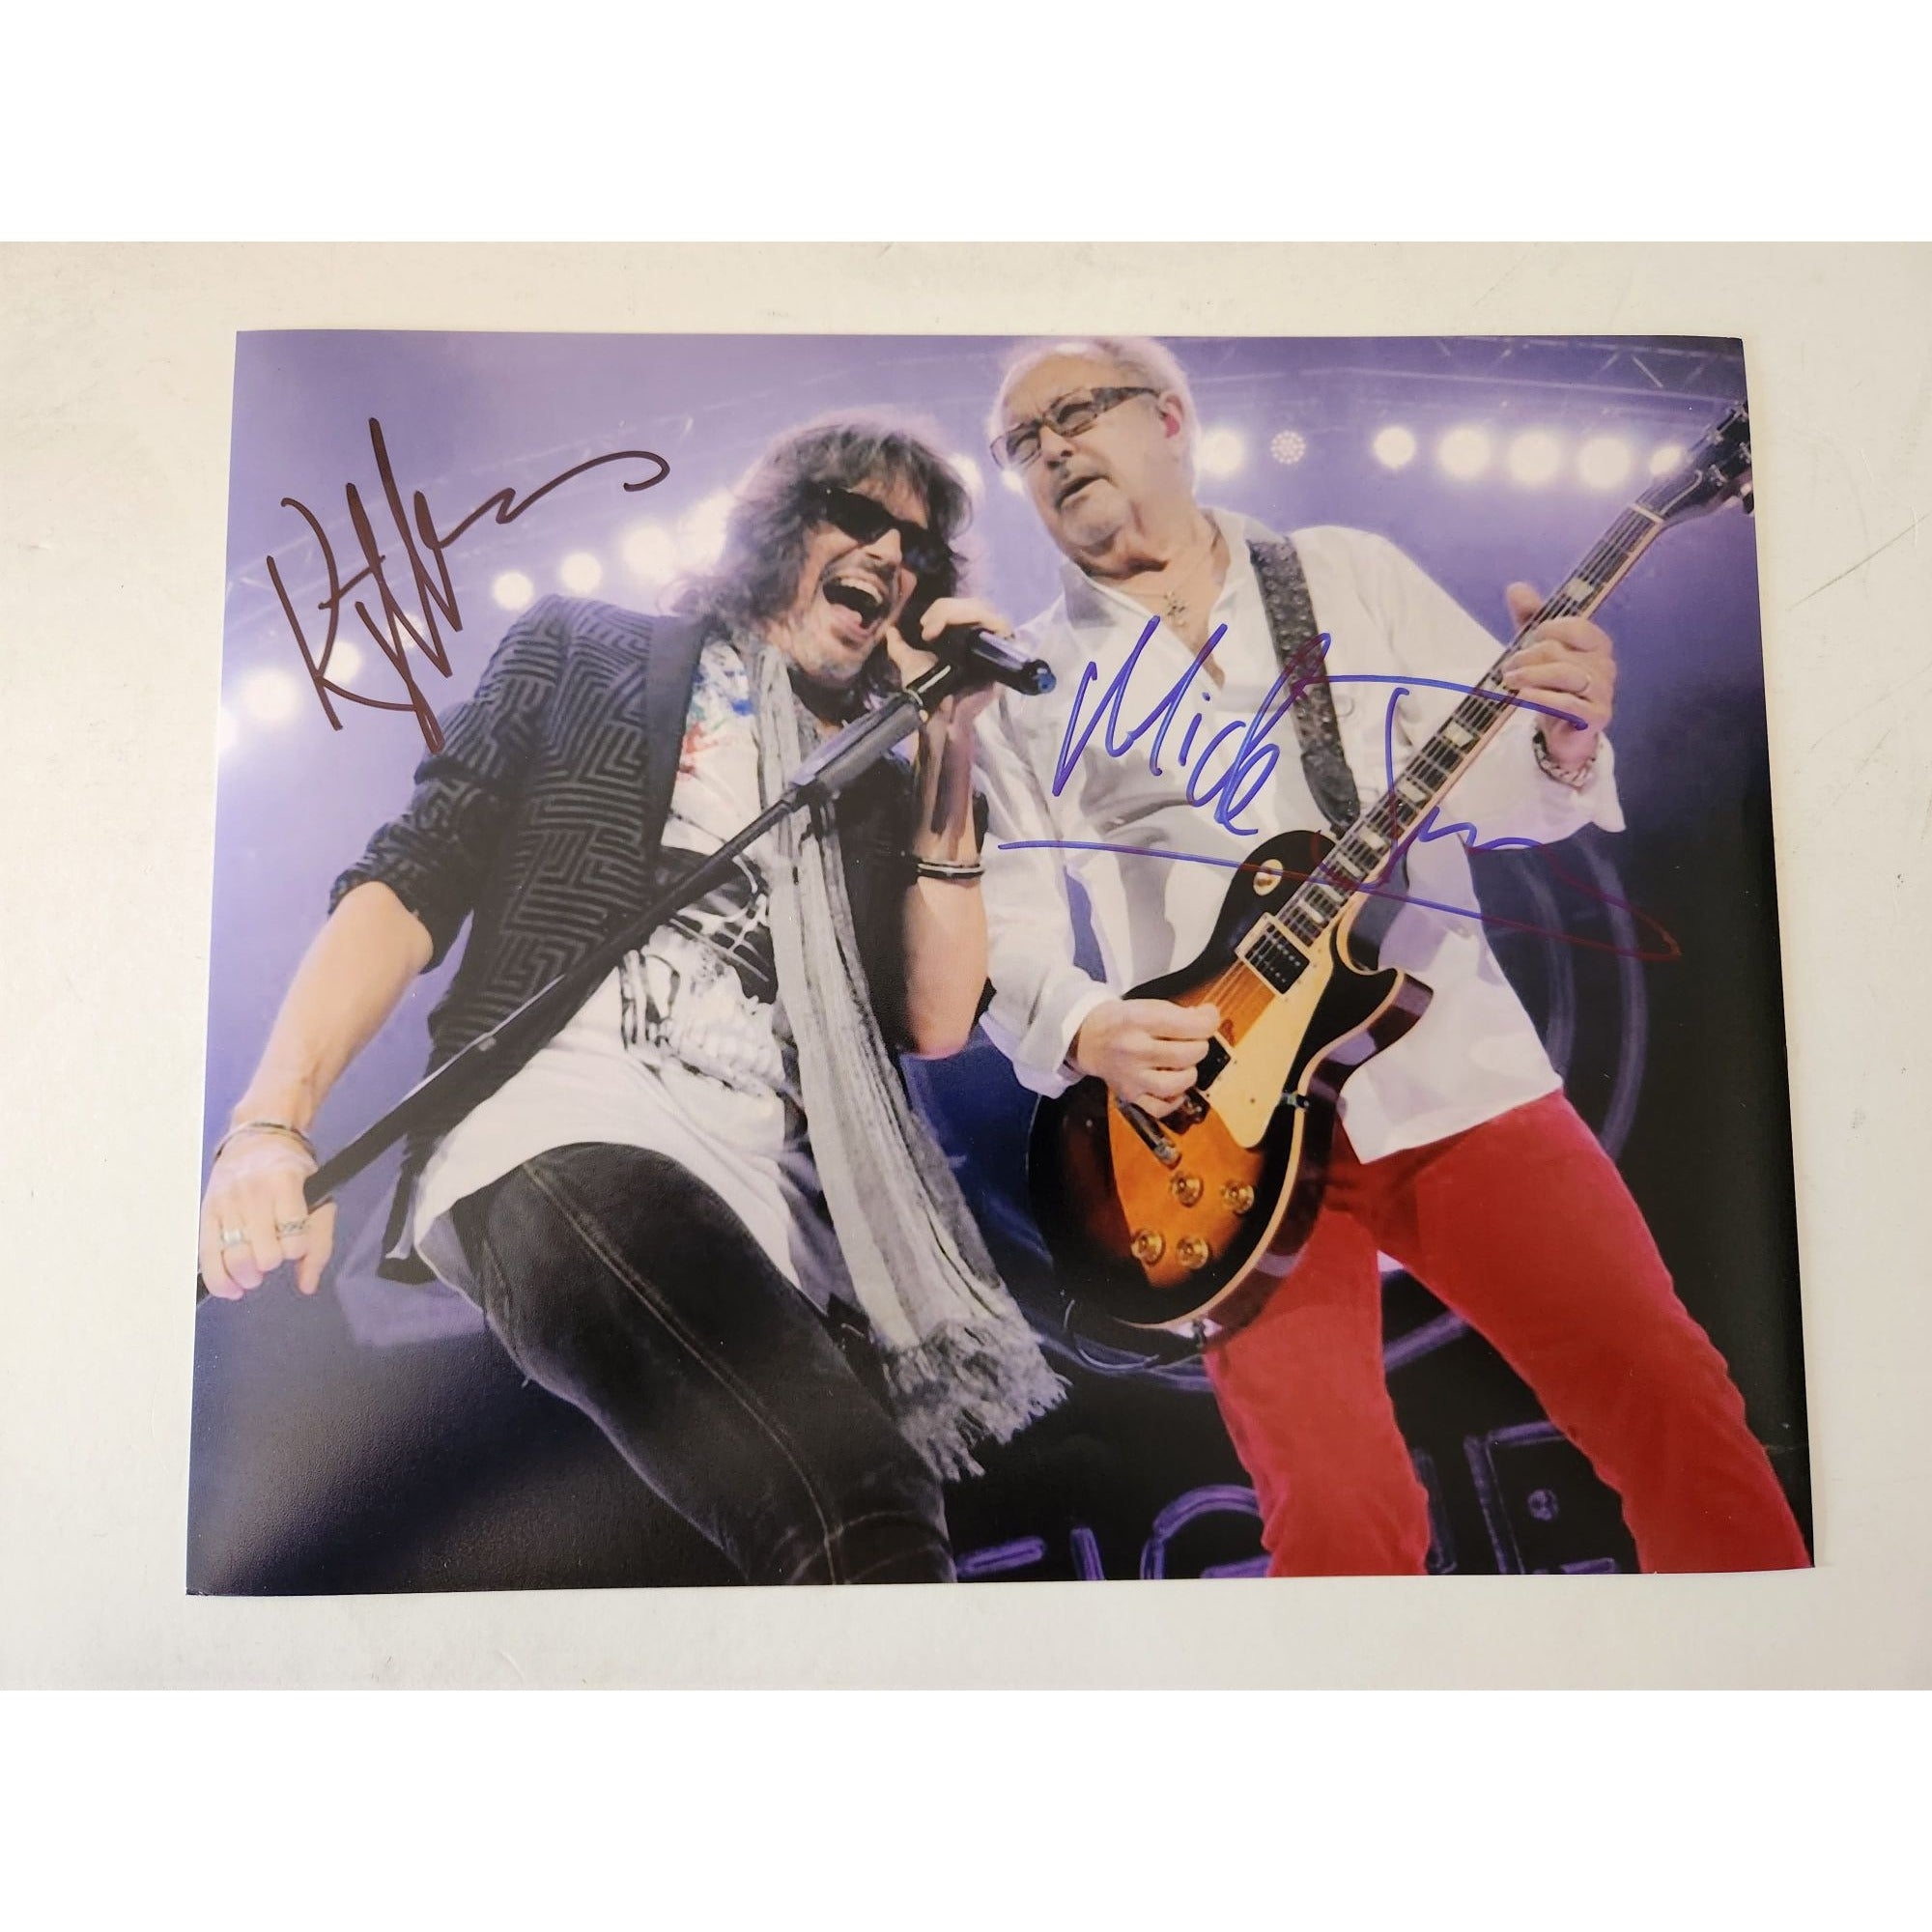 Foreigner lead singer Kaylee Hansen and lead guitarist Mick Jones 8x10 photo signed with proof